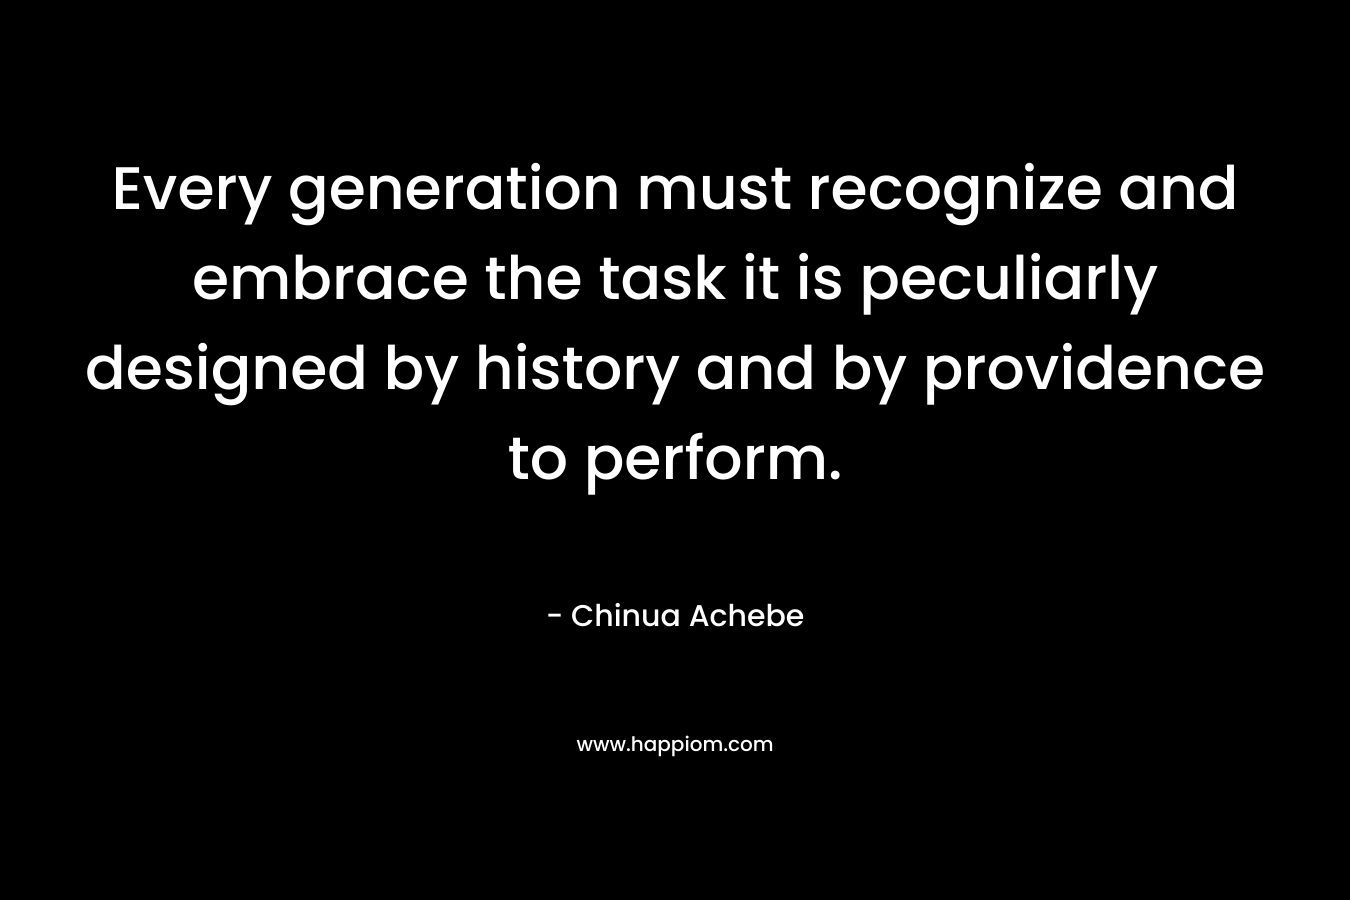 Every generation must recognize and embrace the task it is peculiarly designed by history and by providence to perform.